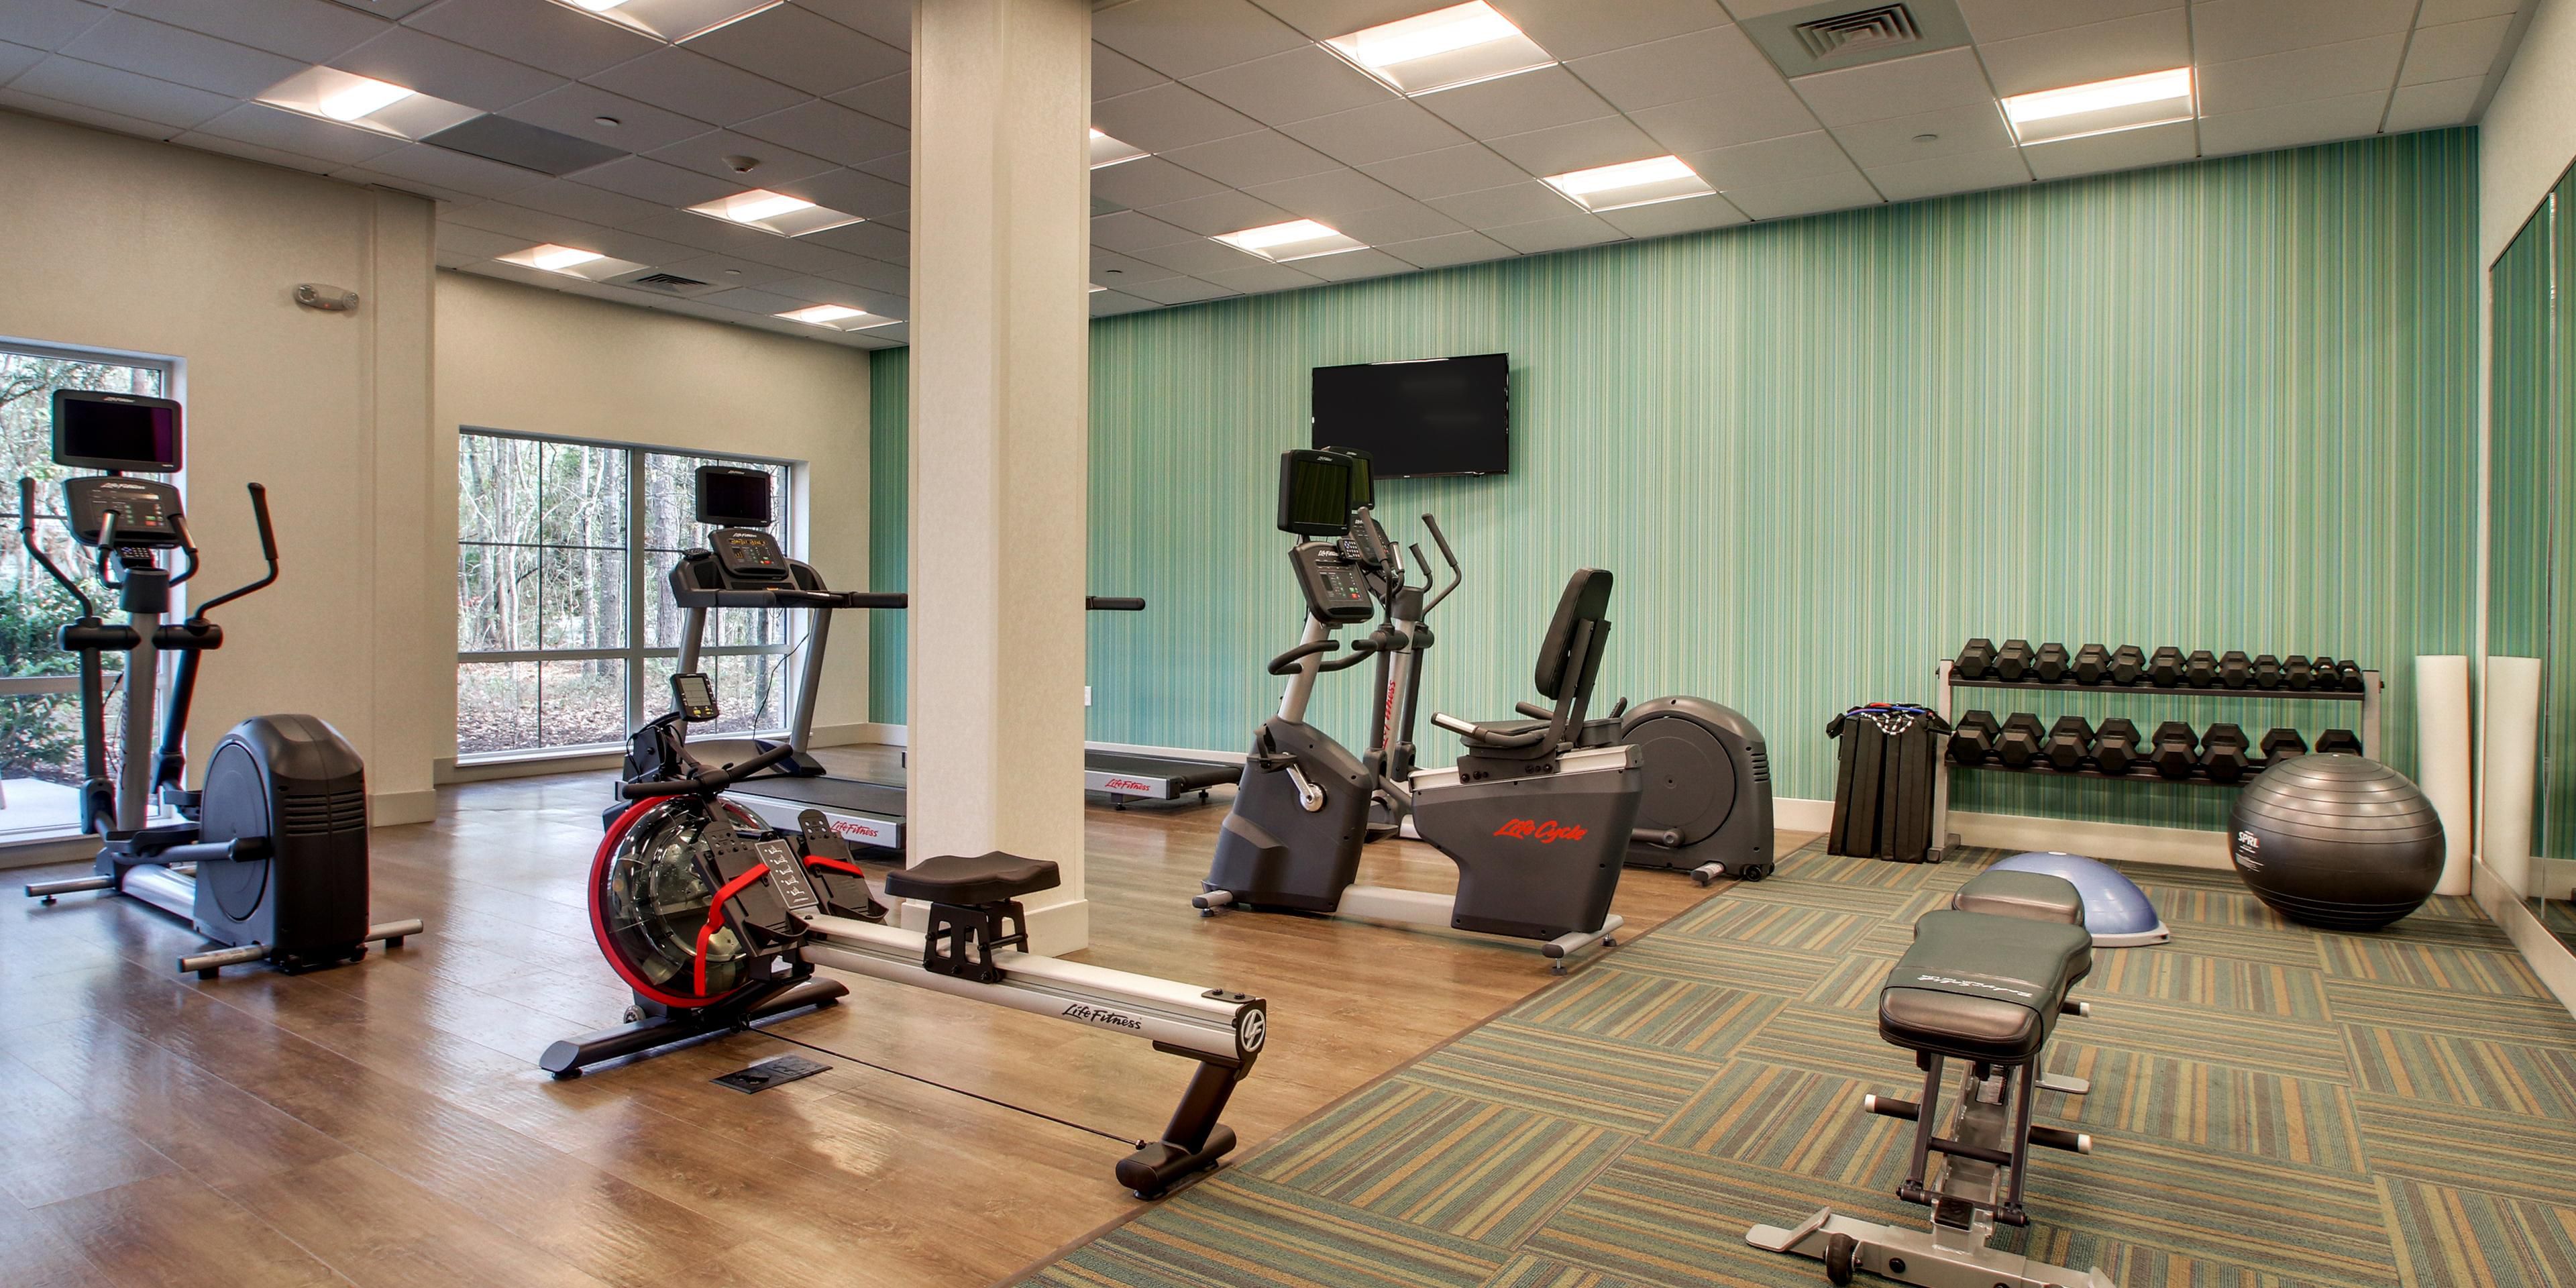 Keep your fitness routine on track. Our oversized Fitness Center features state-of-the-art equipment with HDTV on our treadmill, elliptical, and stationary bike. Free weights, yoga mats, balance ball, and Bosu ball are also available. Complimentary individually wrapped ear buds, hand sanitizer, and disinfecting equipment wipes.